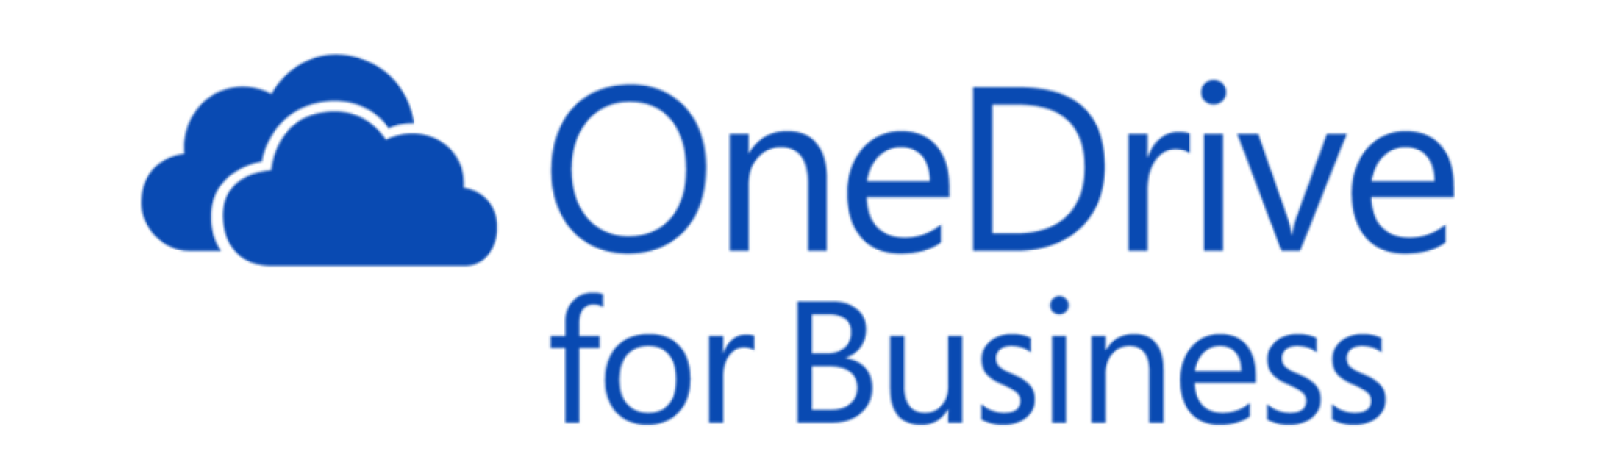 Save to OneDrive for Business